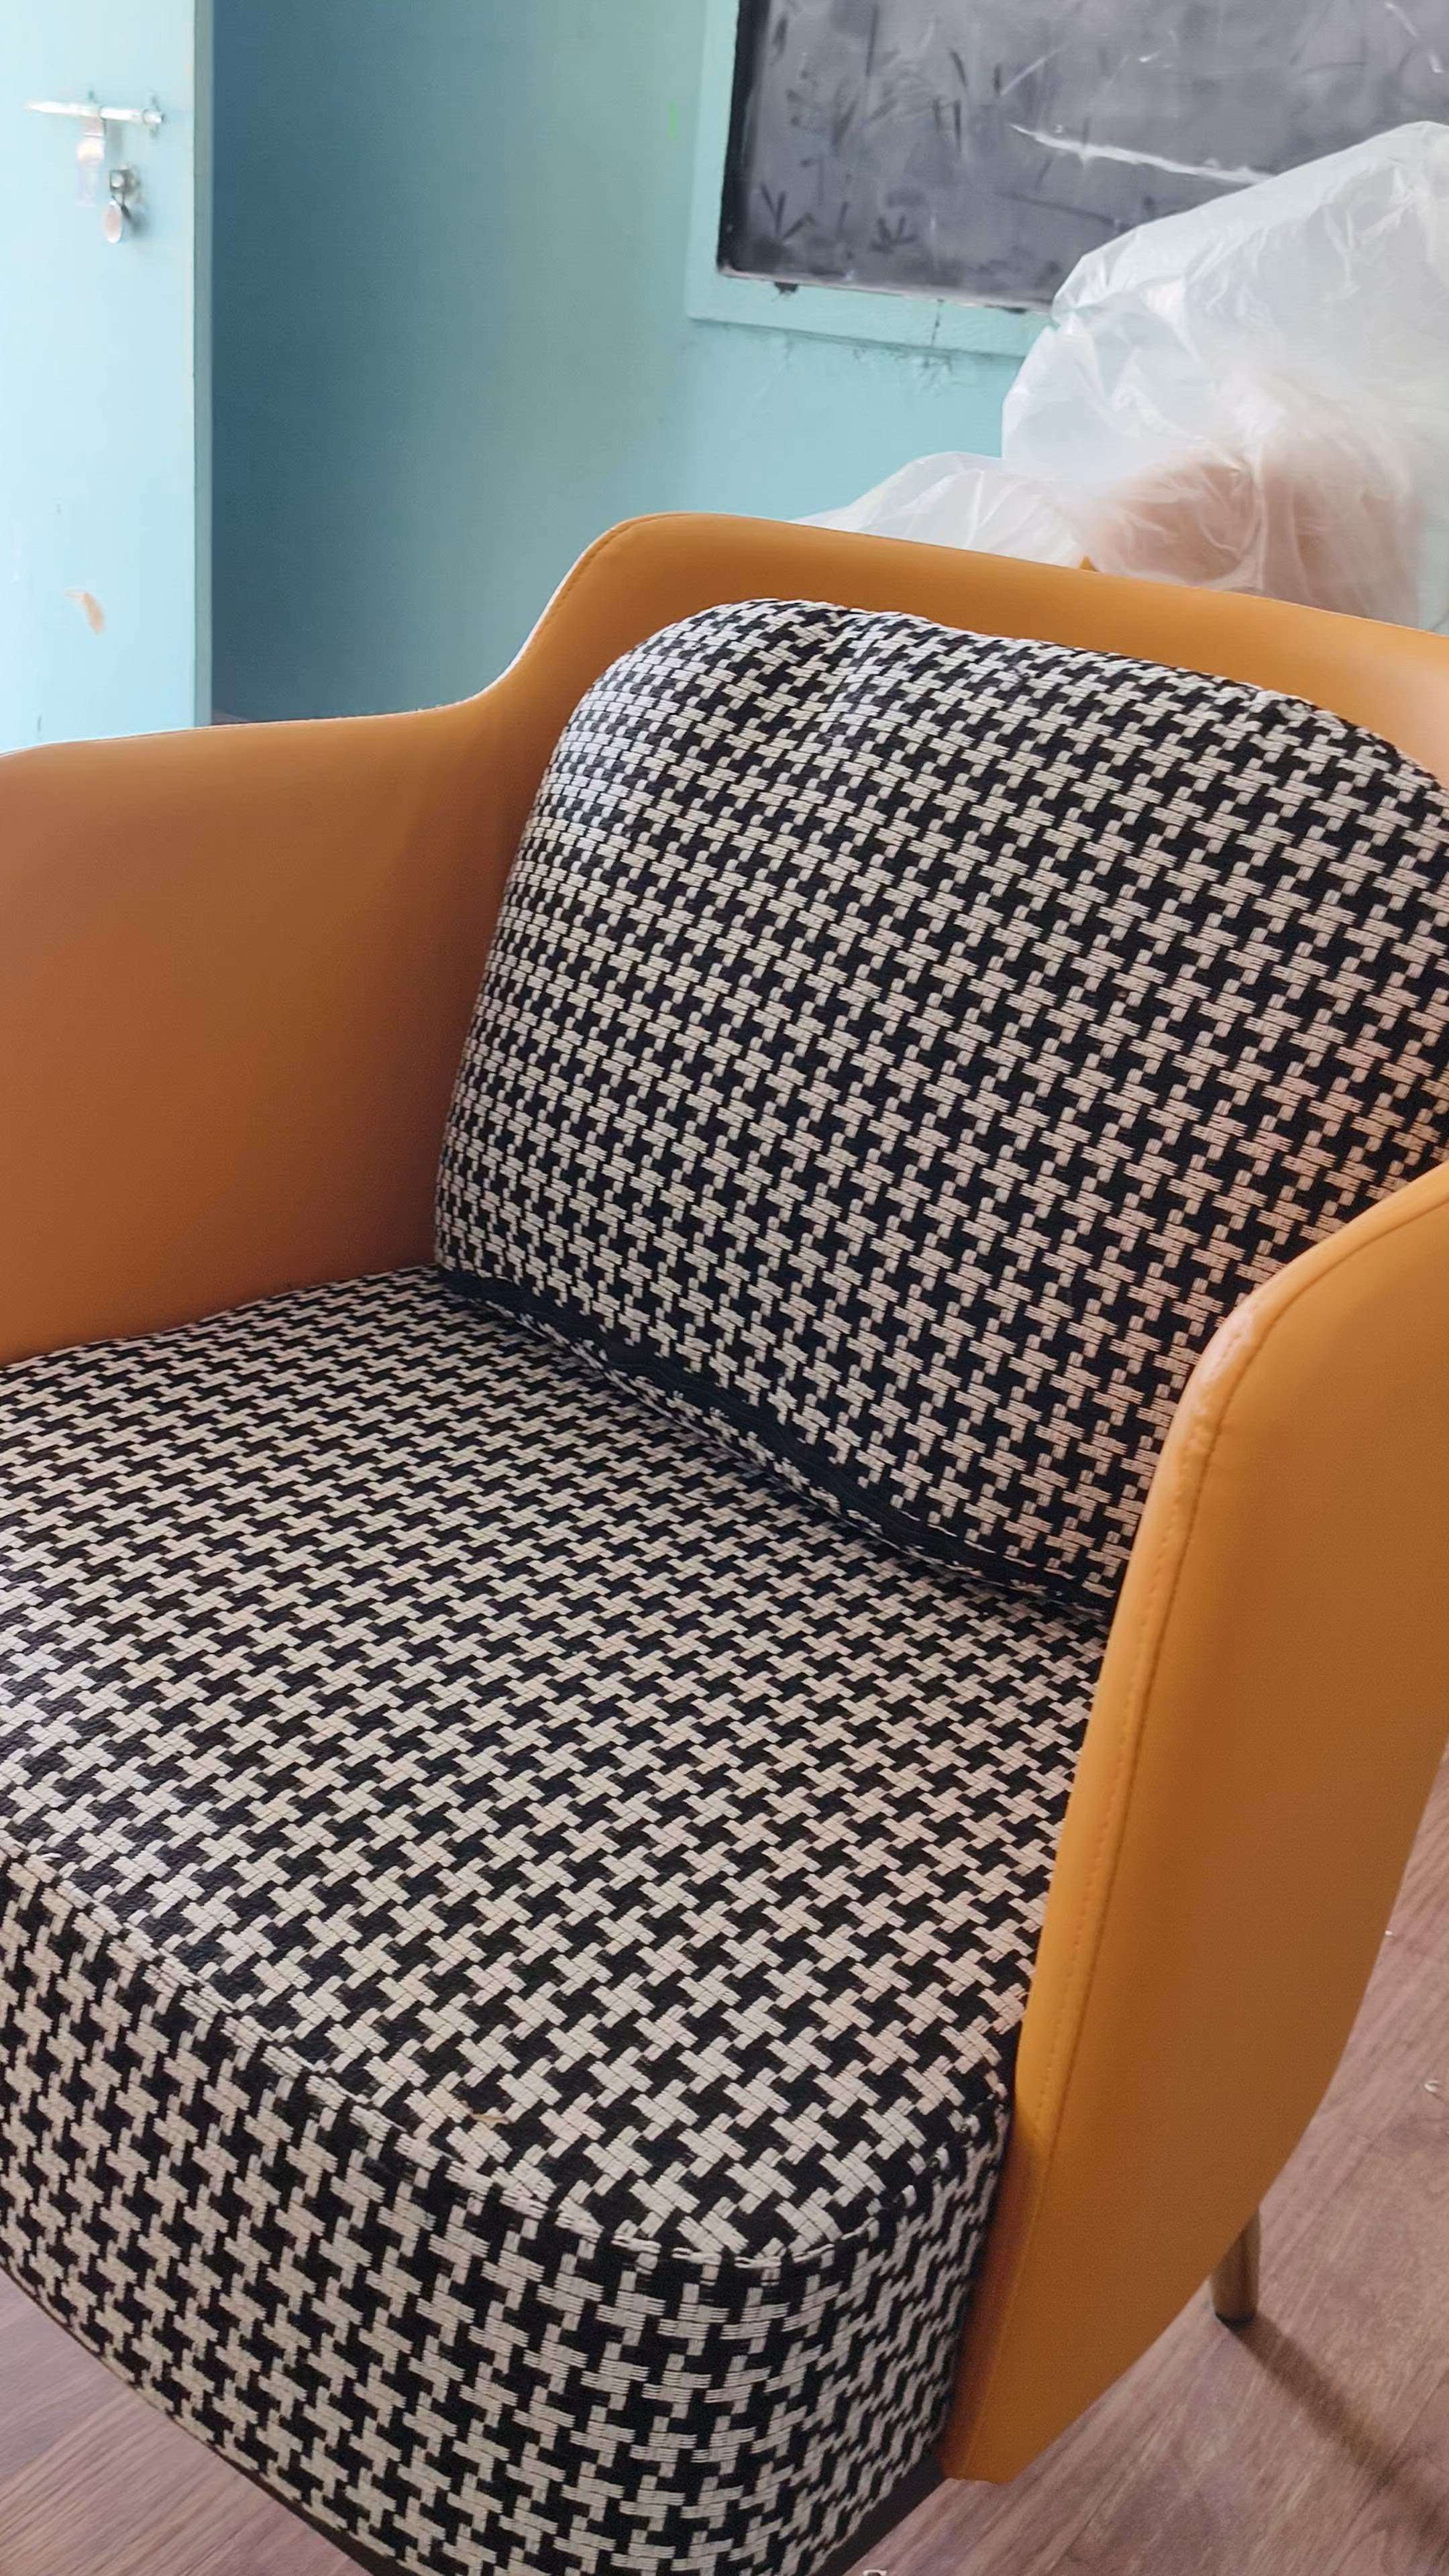 best chair cushion for all india service
contact number...8827766794
.
.
.
.
.
.
..
. # #DiningChairs  #HIGH_BACK_CHAIR  #DiningTableAndChairs  #HIGH_BACK_CHAIR  #chair  #chair&table  #3chair  #chairbars  #3chair  #chairsofa  #chaircleaningservices  #chairinterior  #chair​​